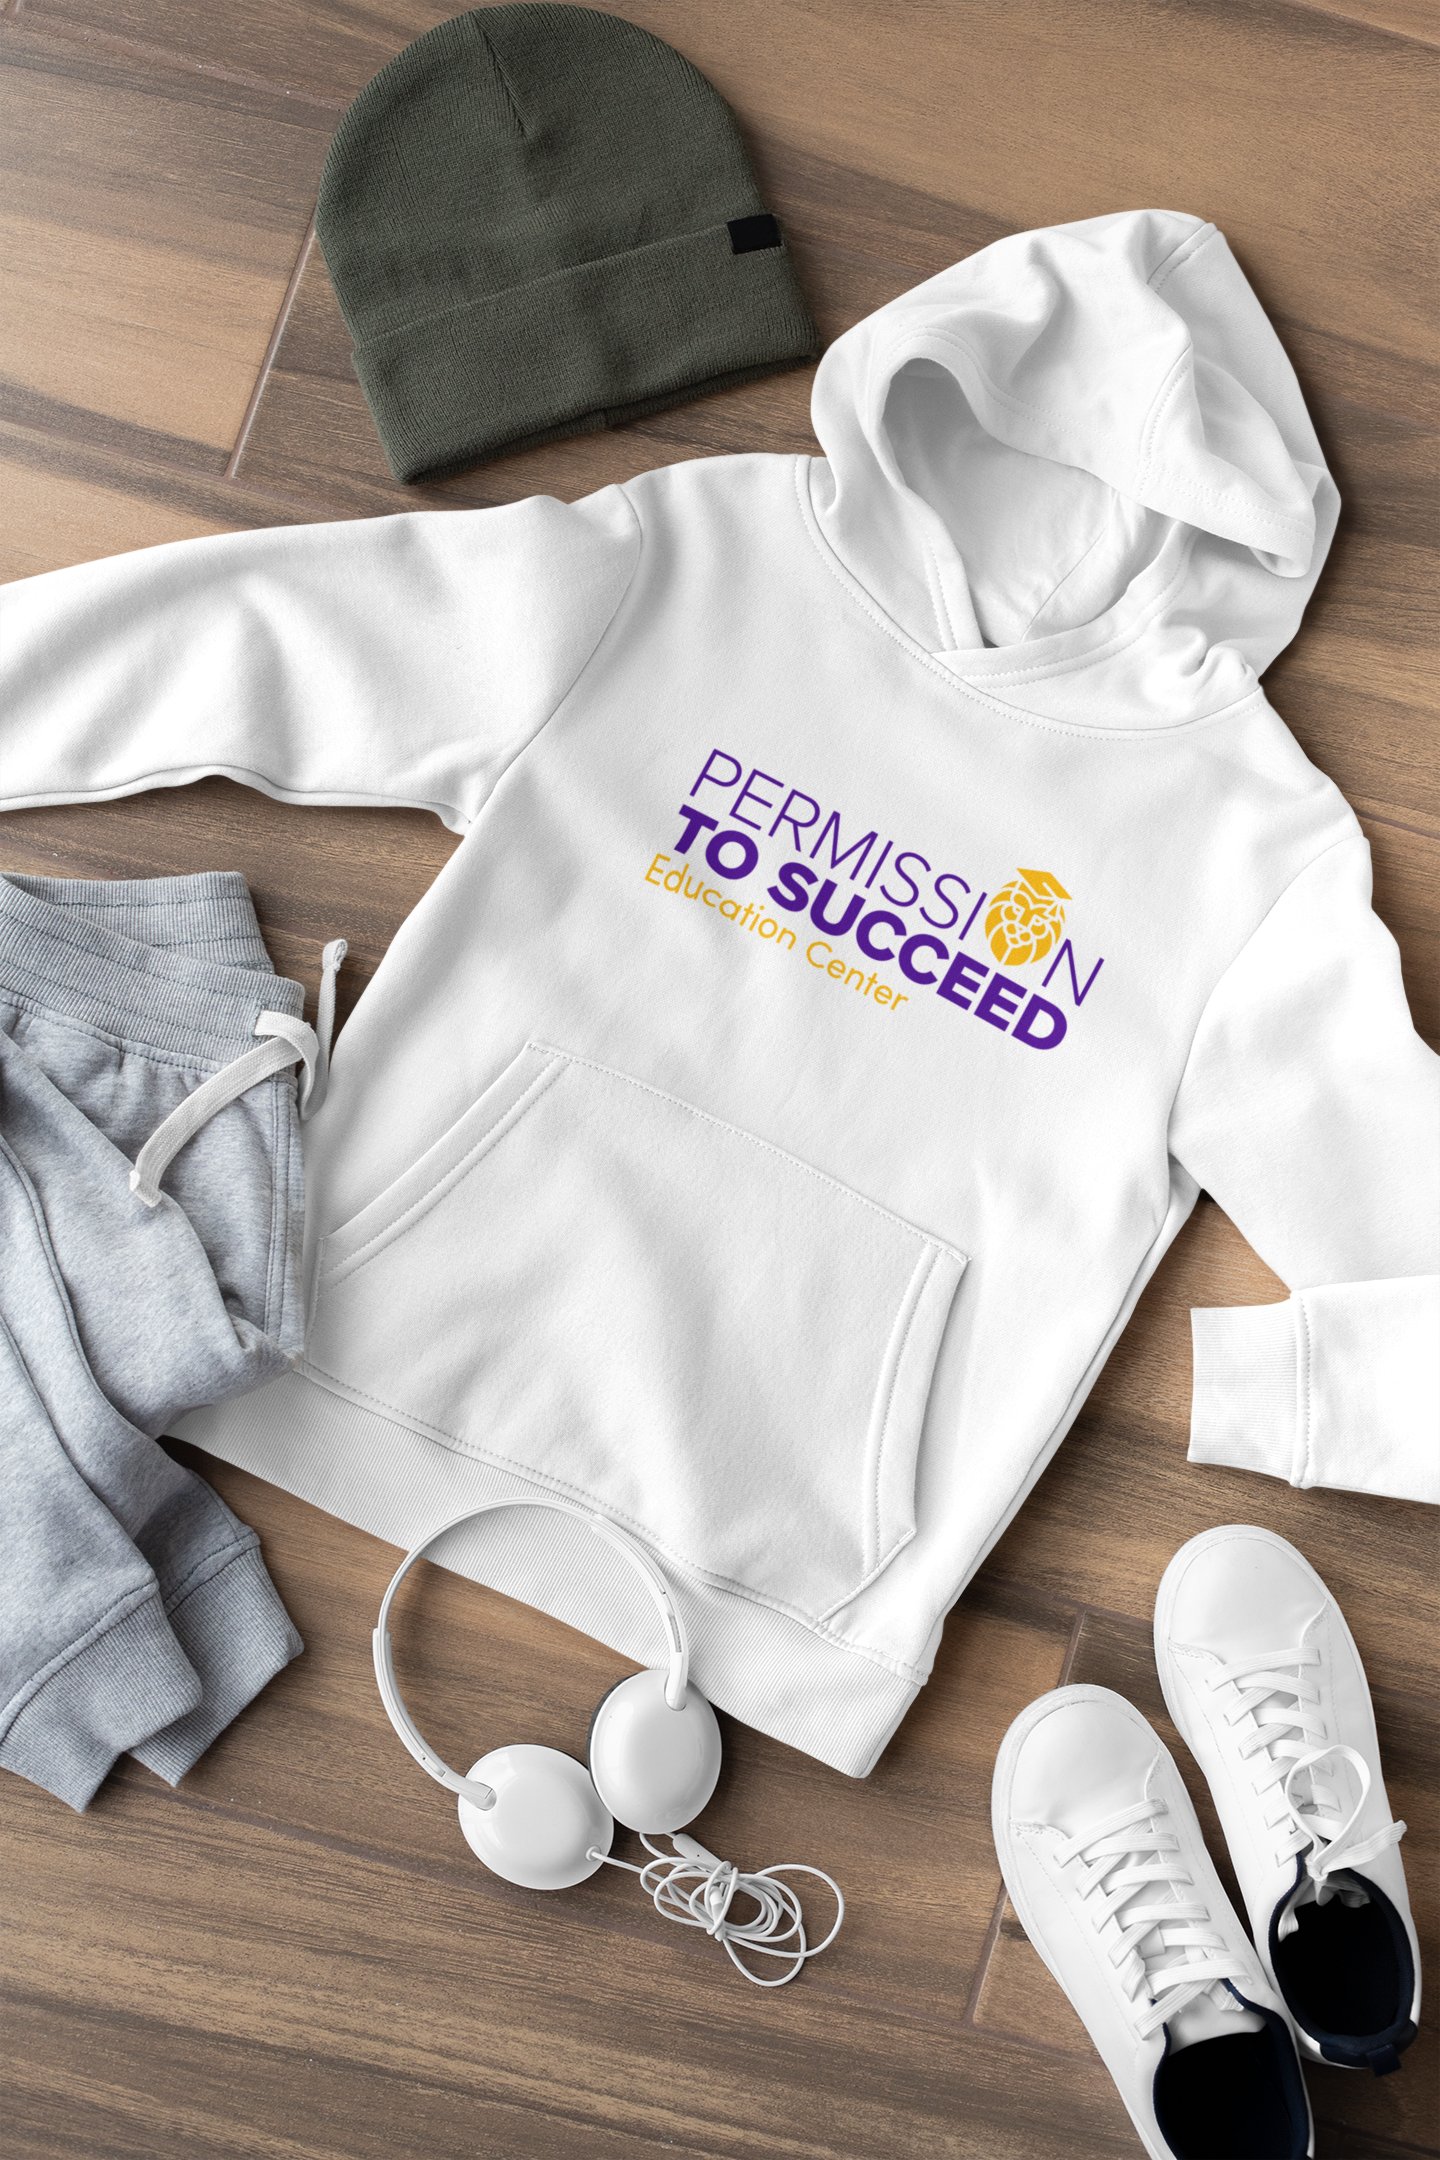 Permission To Succeed Youth Unisex Hoodie